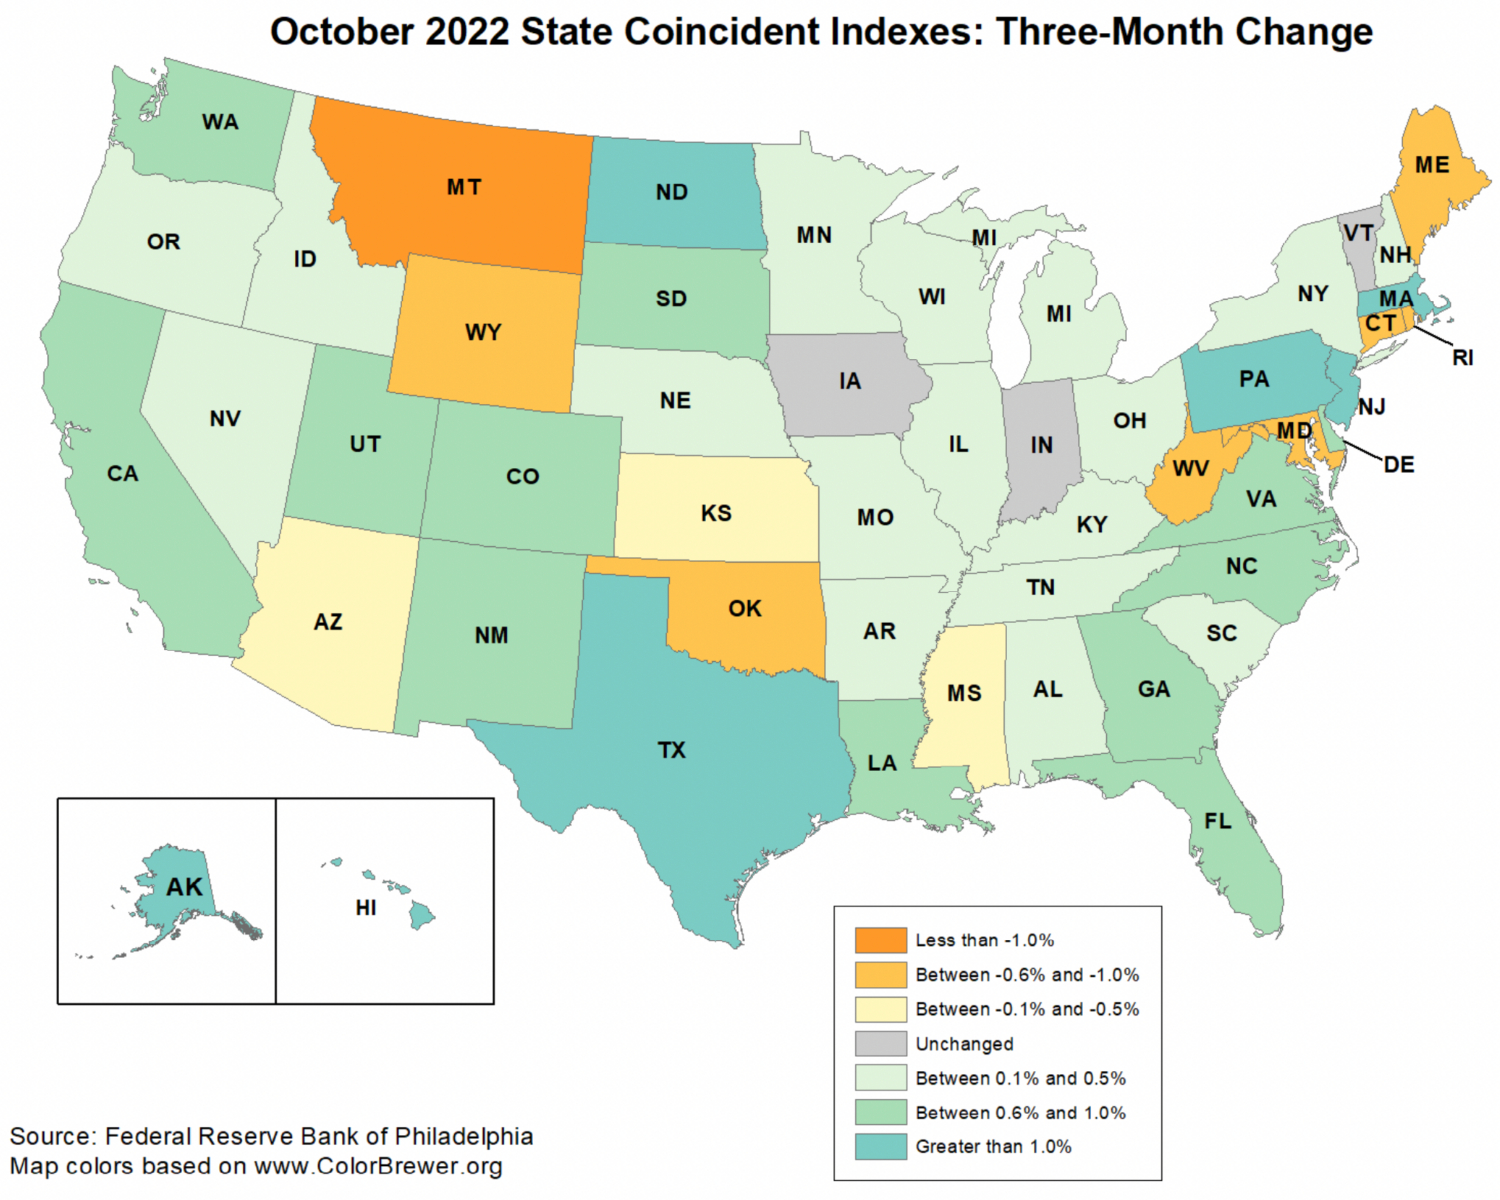 Coincident State Indexes (October 2022)